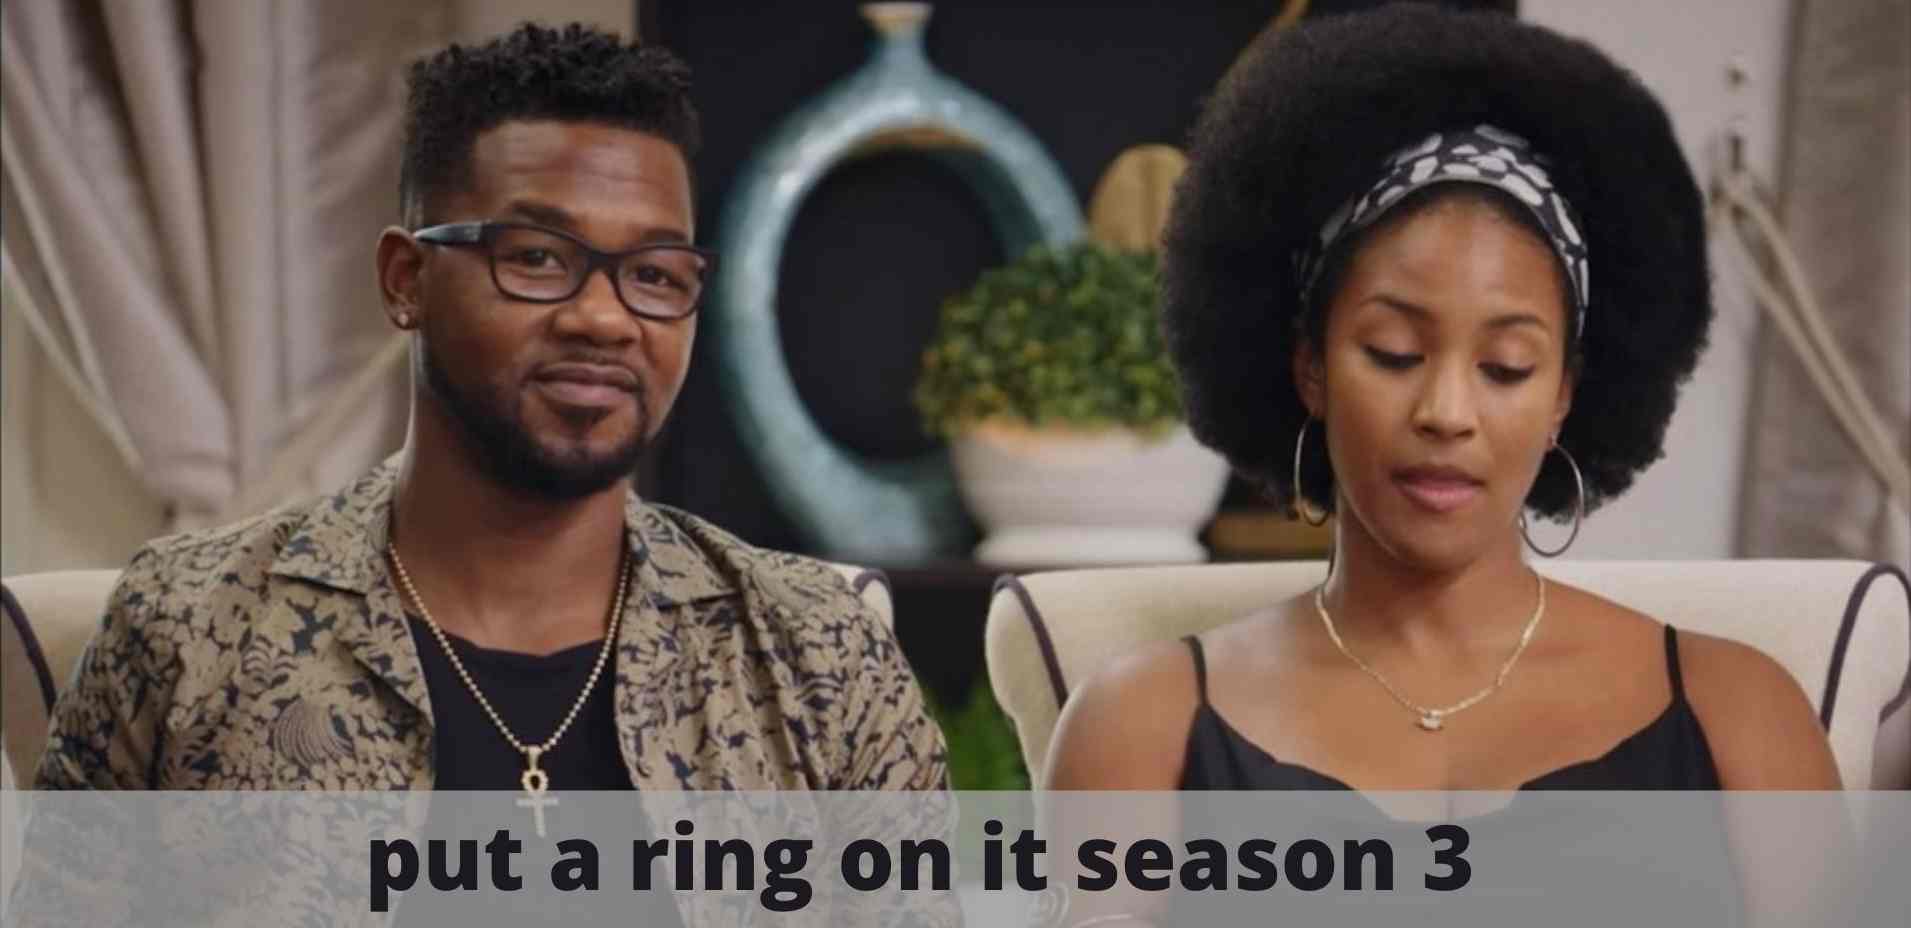 Put a Ring on It Season 3 Premiere Date Set for March 25, 2022